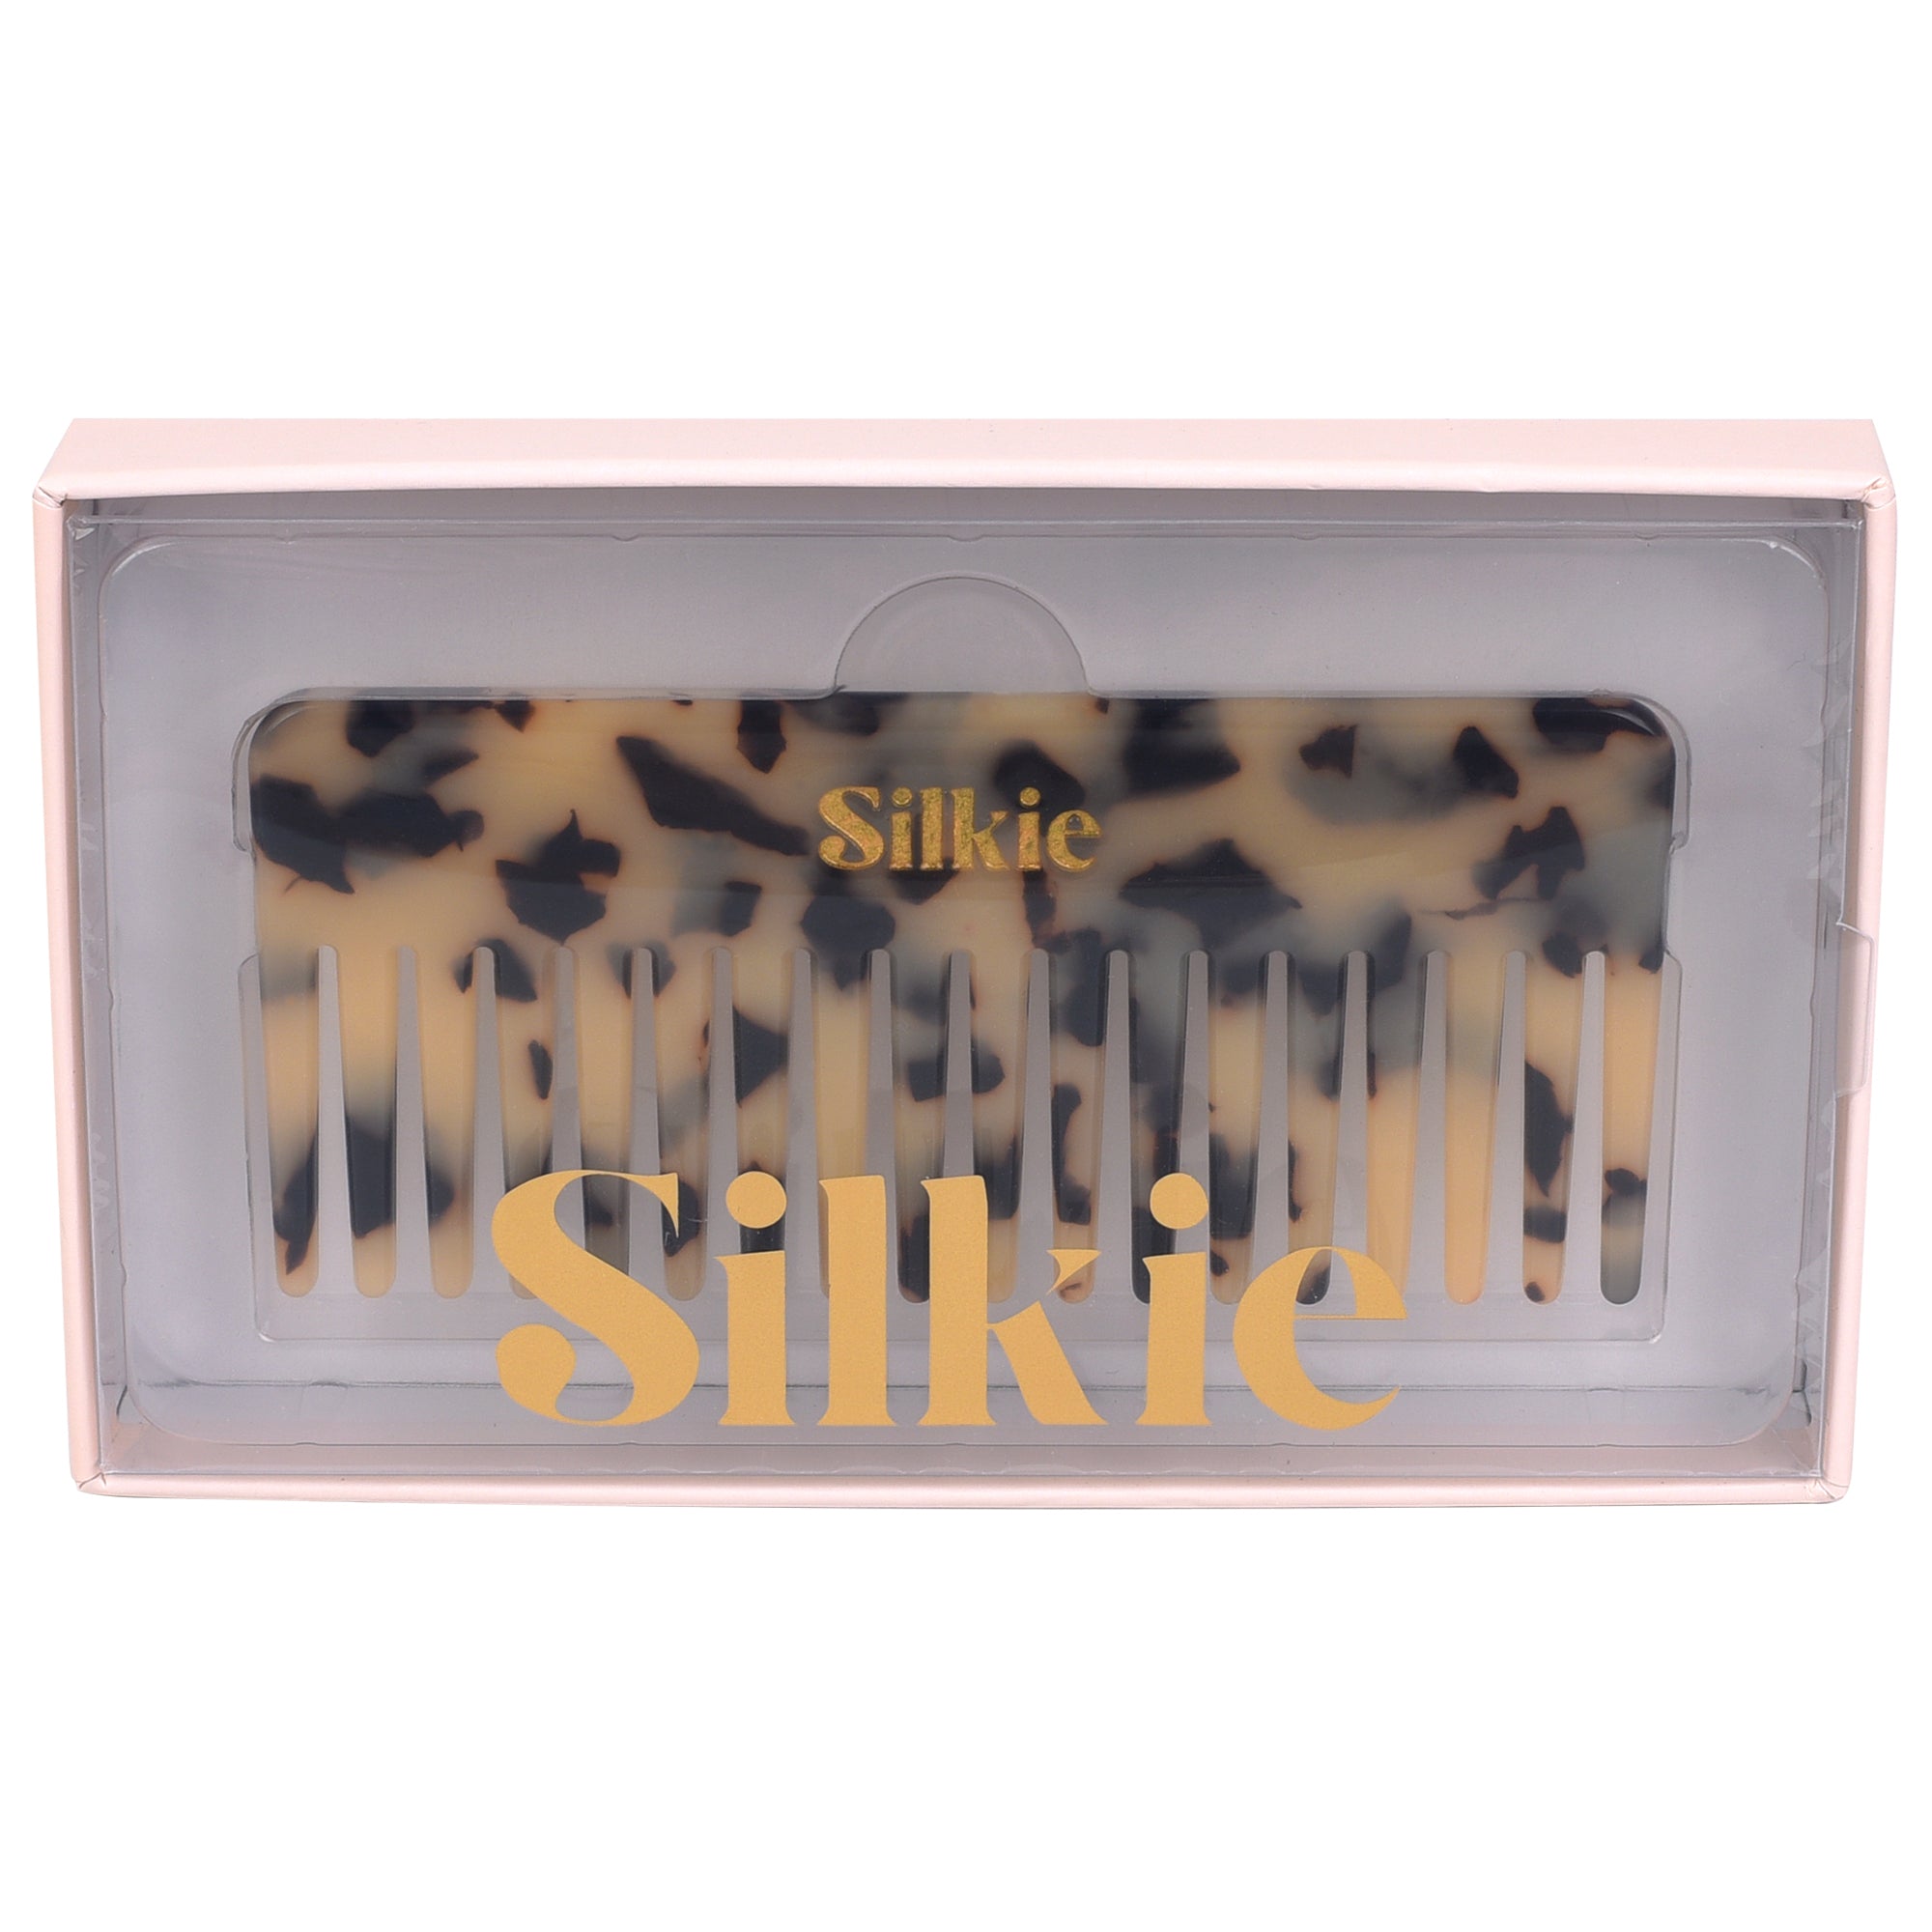 Silkie Acetate Detangling Comb - Your all-in-one hair tool